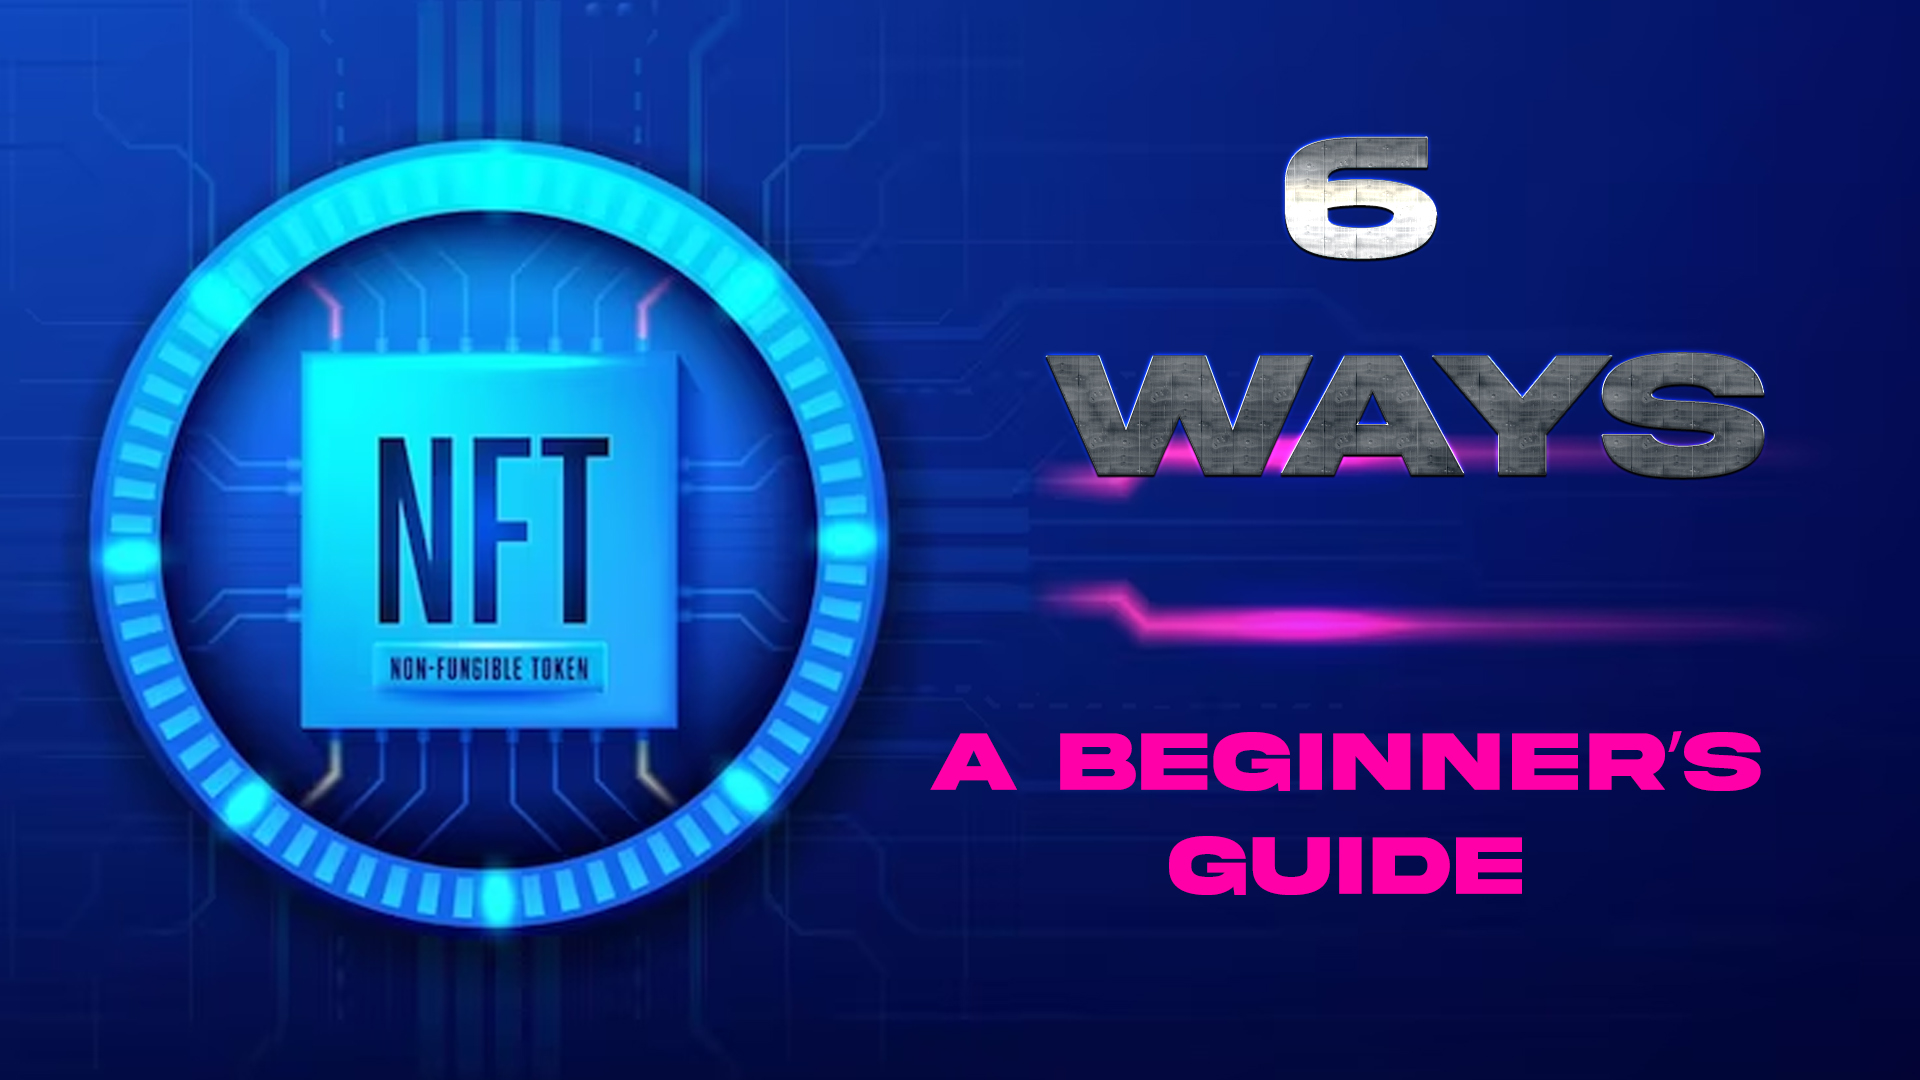 Build Your Wealth Through NFTs in 6 Ways: A Beginner’s Guide